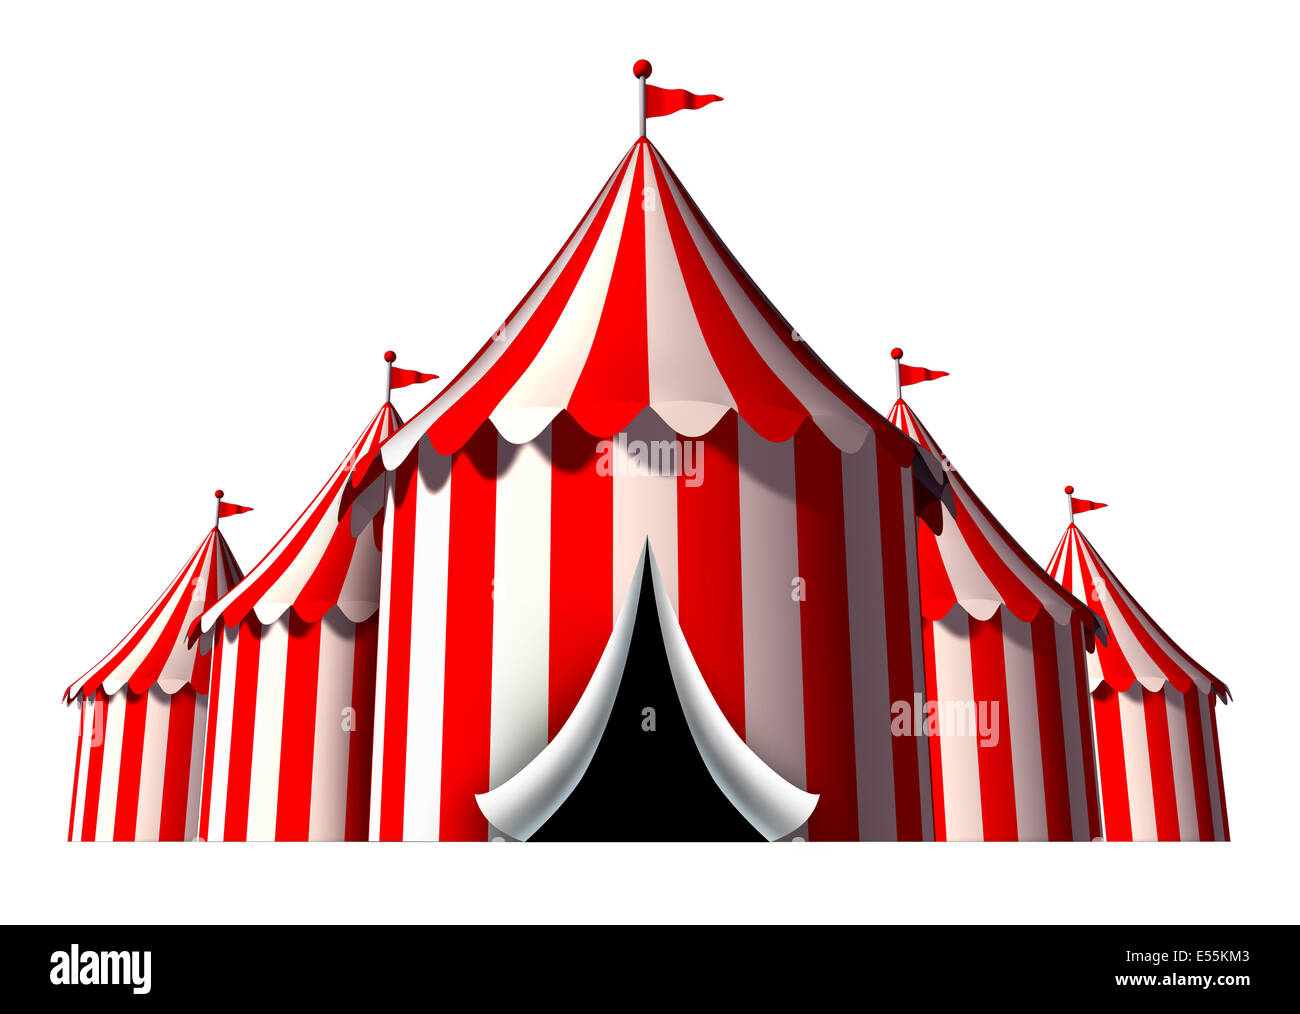 Circus tent design element as a group of big top carnival tents with an opening entrance as a fun entertainment icon for a theatrical celebration or party festival isolated on a white background. Stock Photo